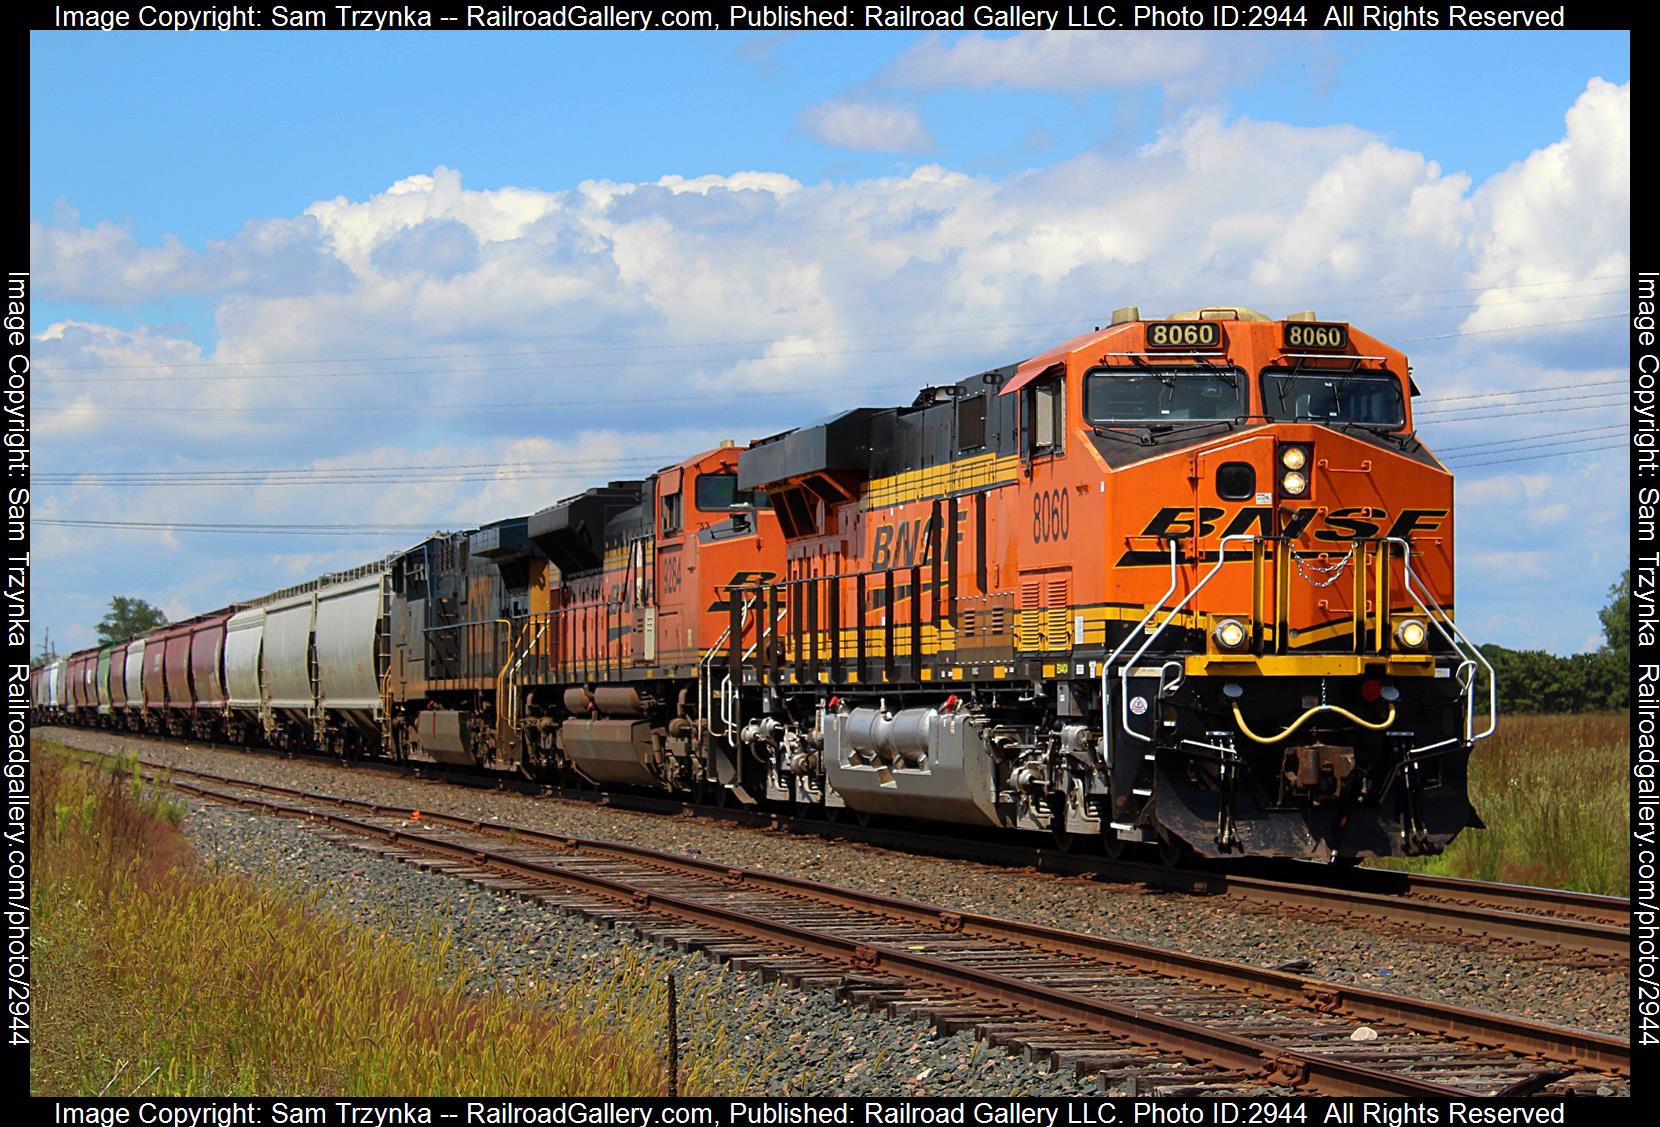 BNSF 8060 is a class GE ES44C4 and  is pictured in Cottage Grove, Minnesota, USA.  This was taken along the BNSF St. Paul Subdivision on the BNSF Railway. Photo Copyright: Sam Trzynka uploaded to Railroad Gallery on 01/12/2024. This photograph of BNSF 8060 was taken on Saturday, August 12, 2023. All Rights Reserved. 